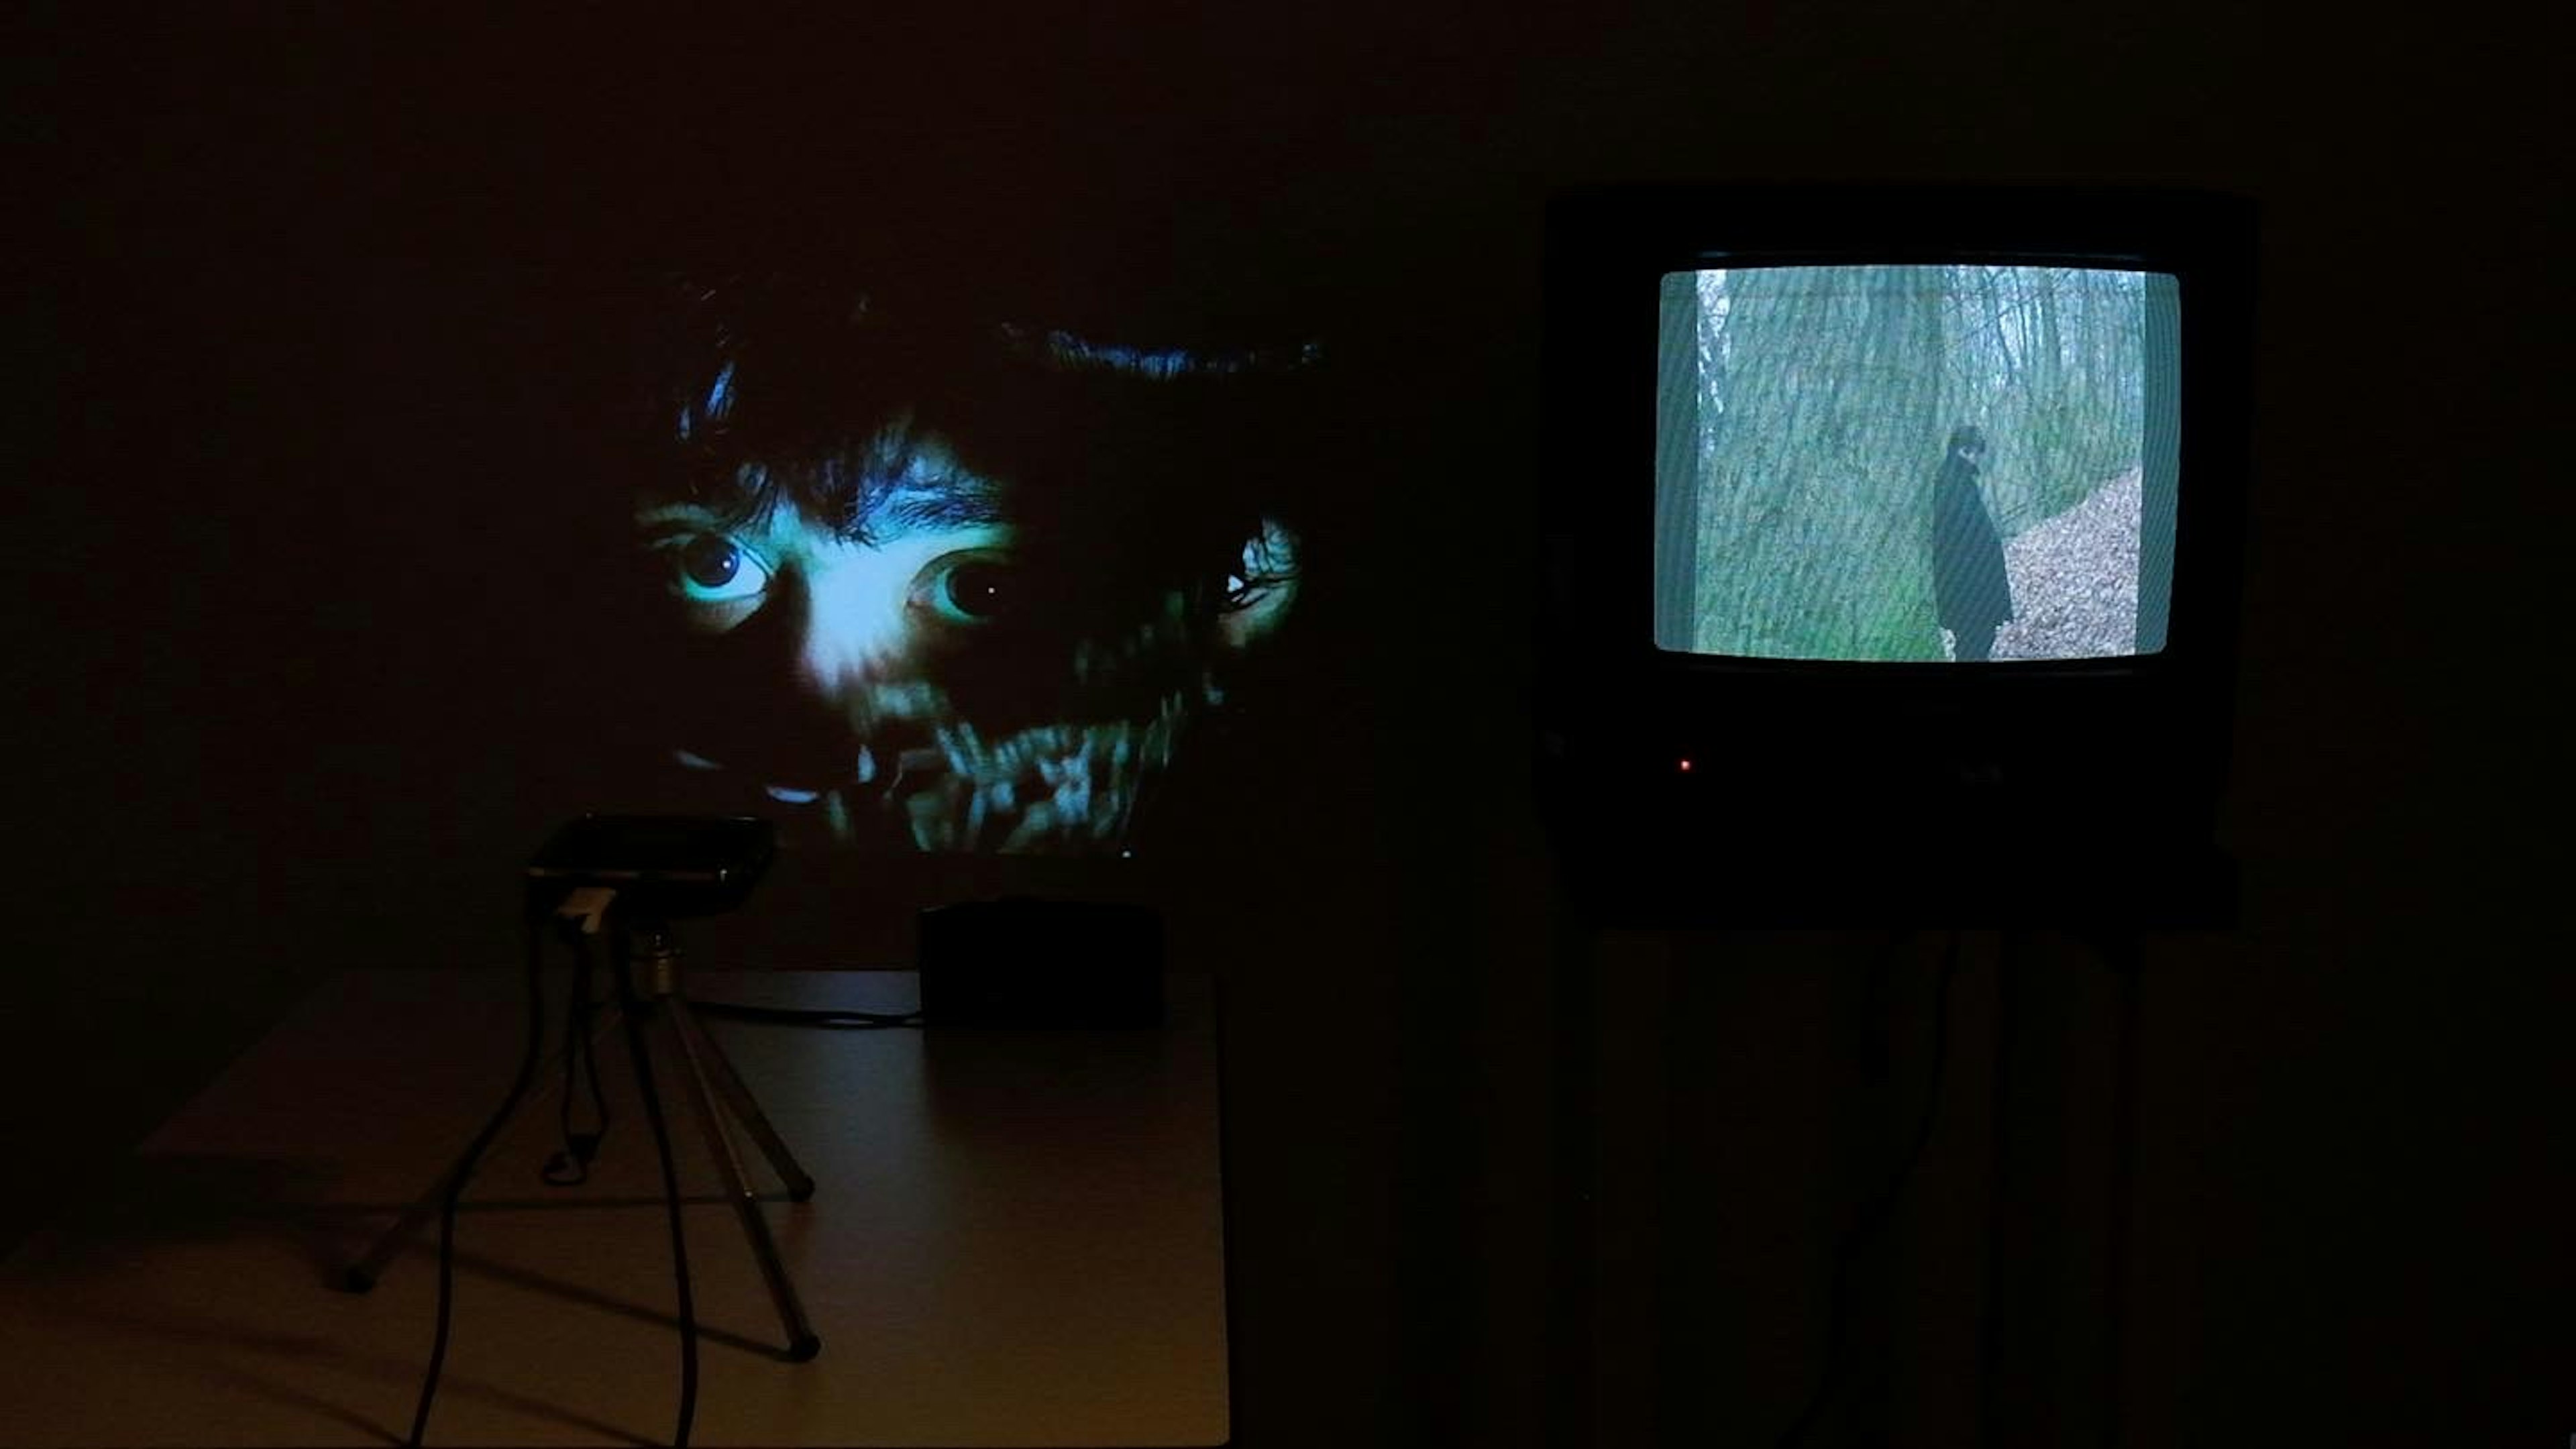 A dark wall with a projection on the left, and a CRT television on the right. The projected video features Milo's face under a light image of a ghost. The video on the CRT television features a cloaked figure in a forest setting. 